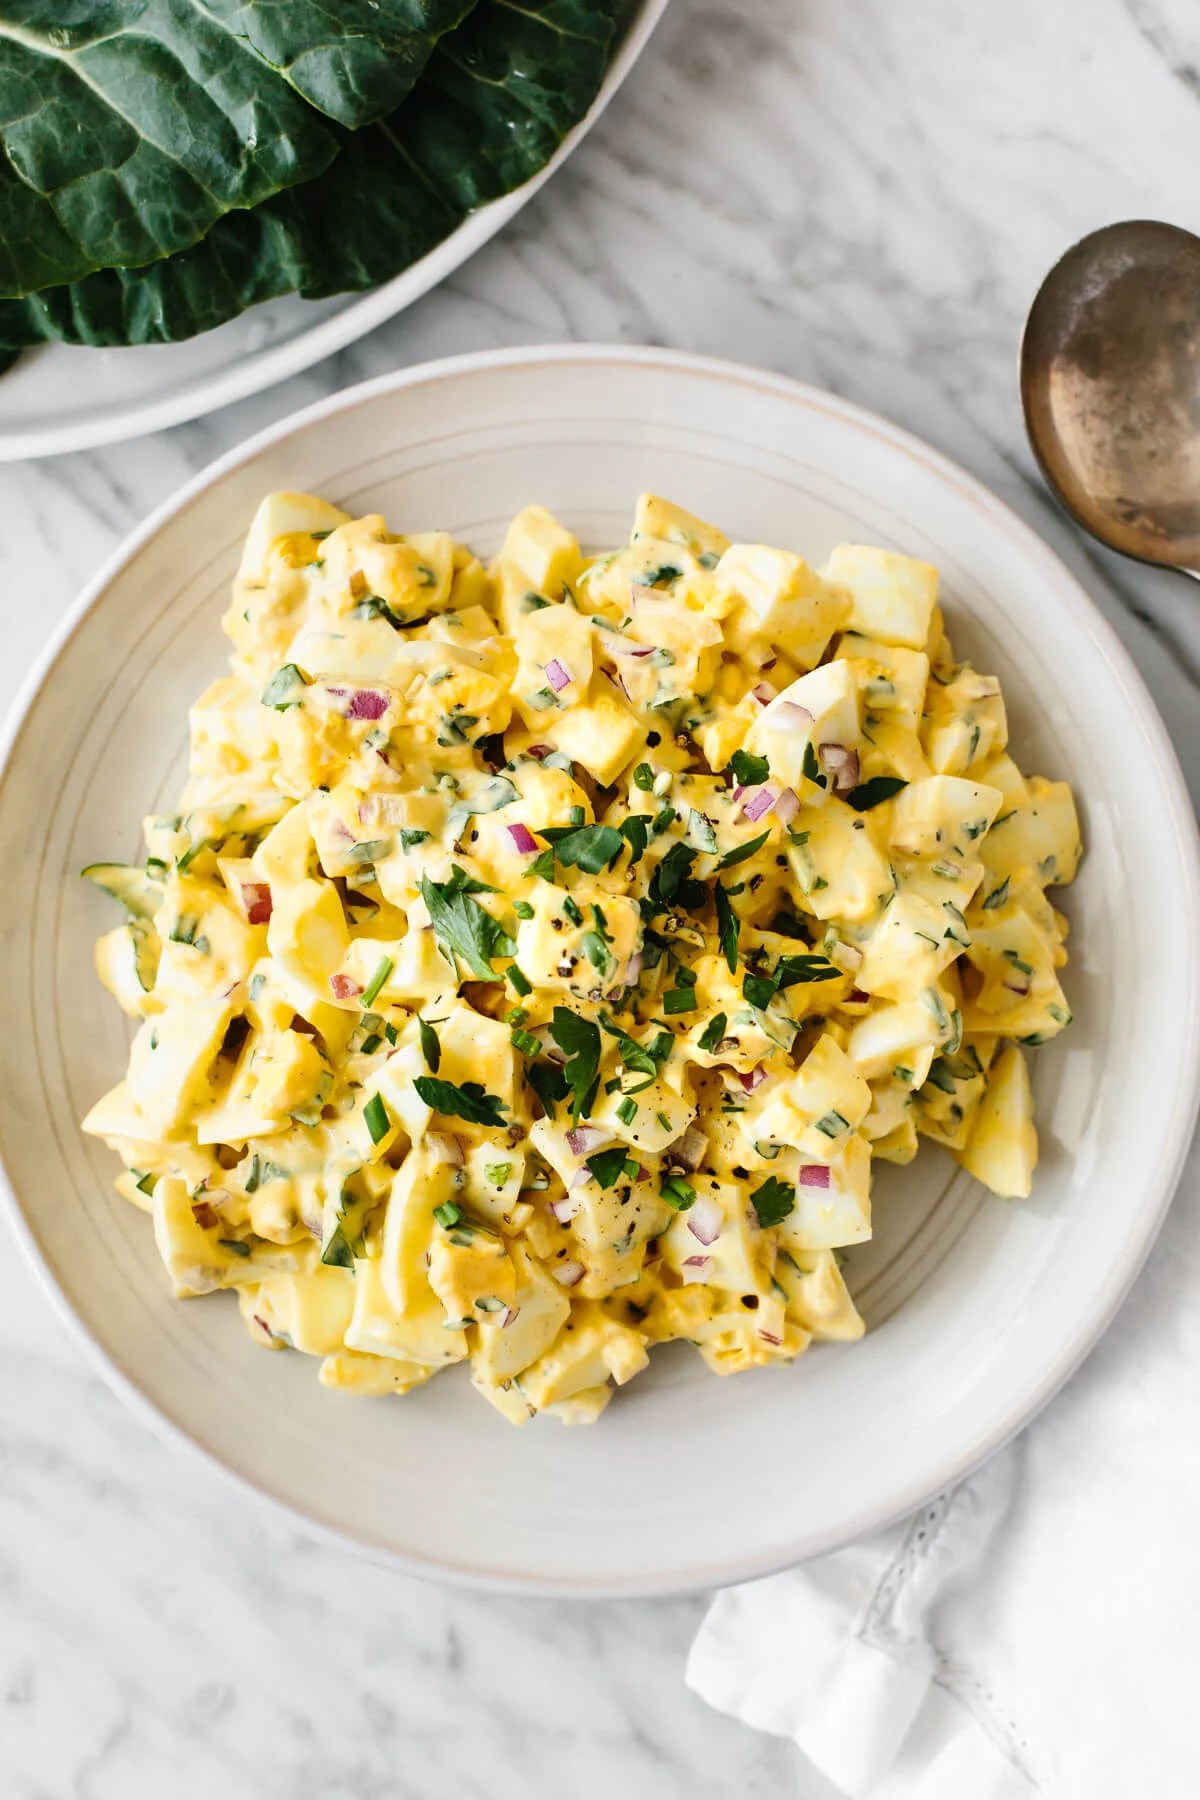 A plate of egg salad